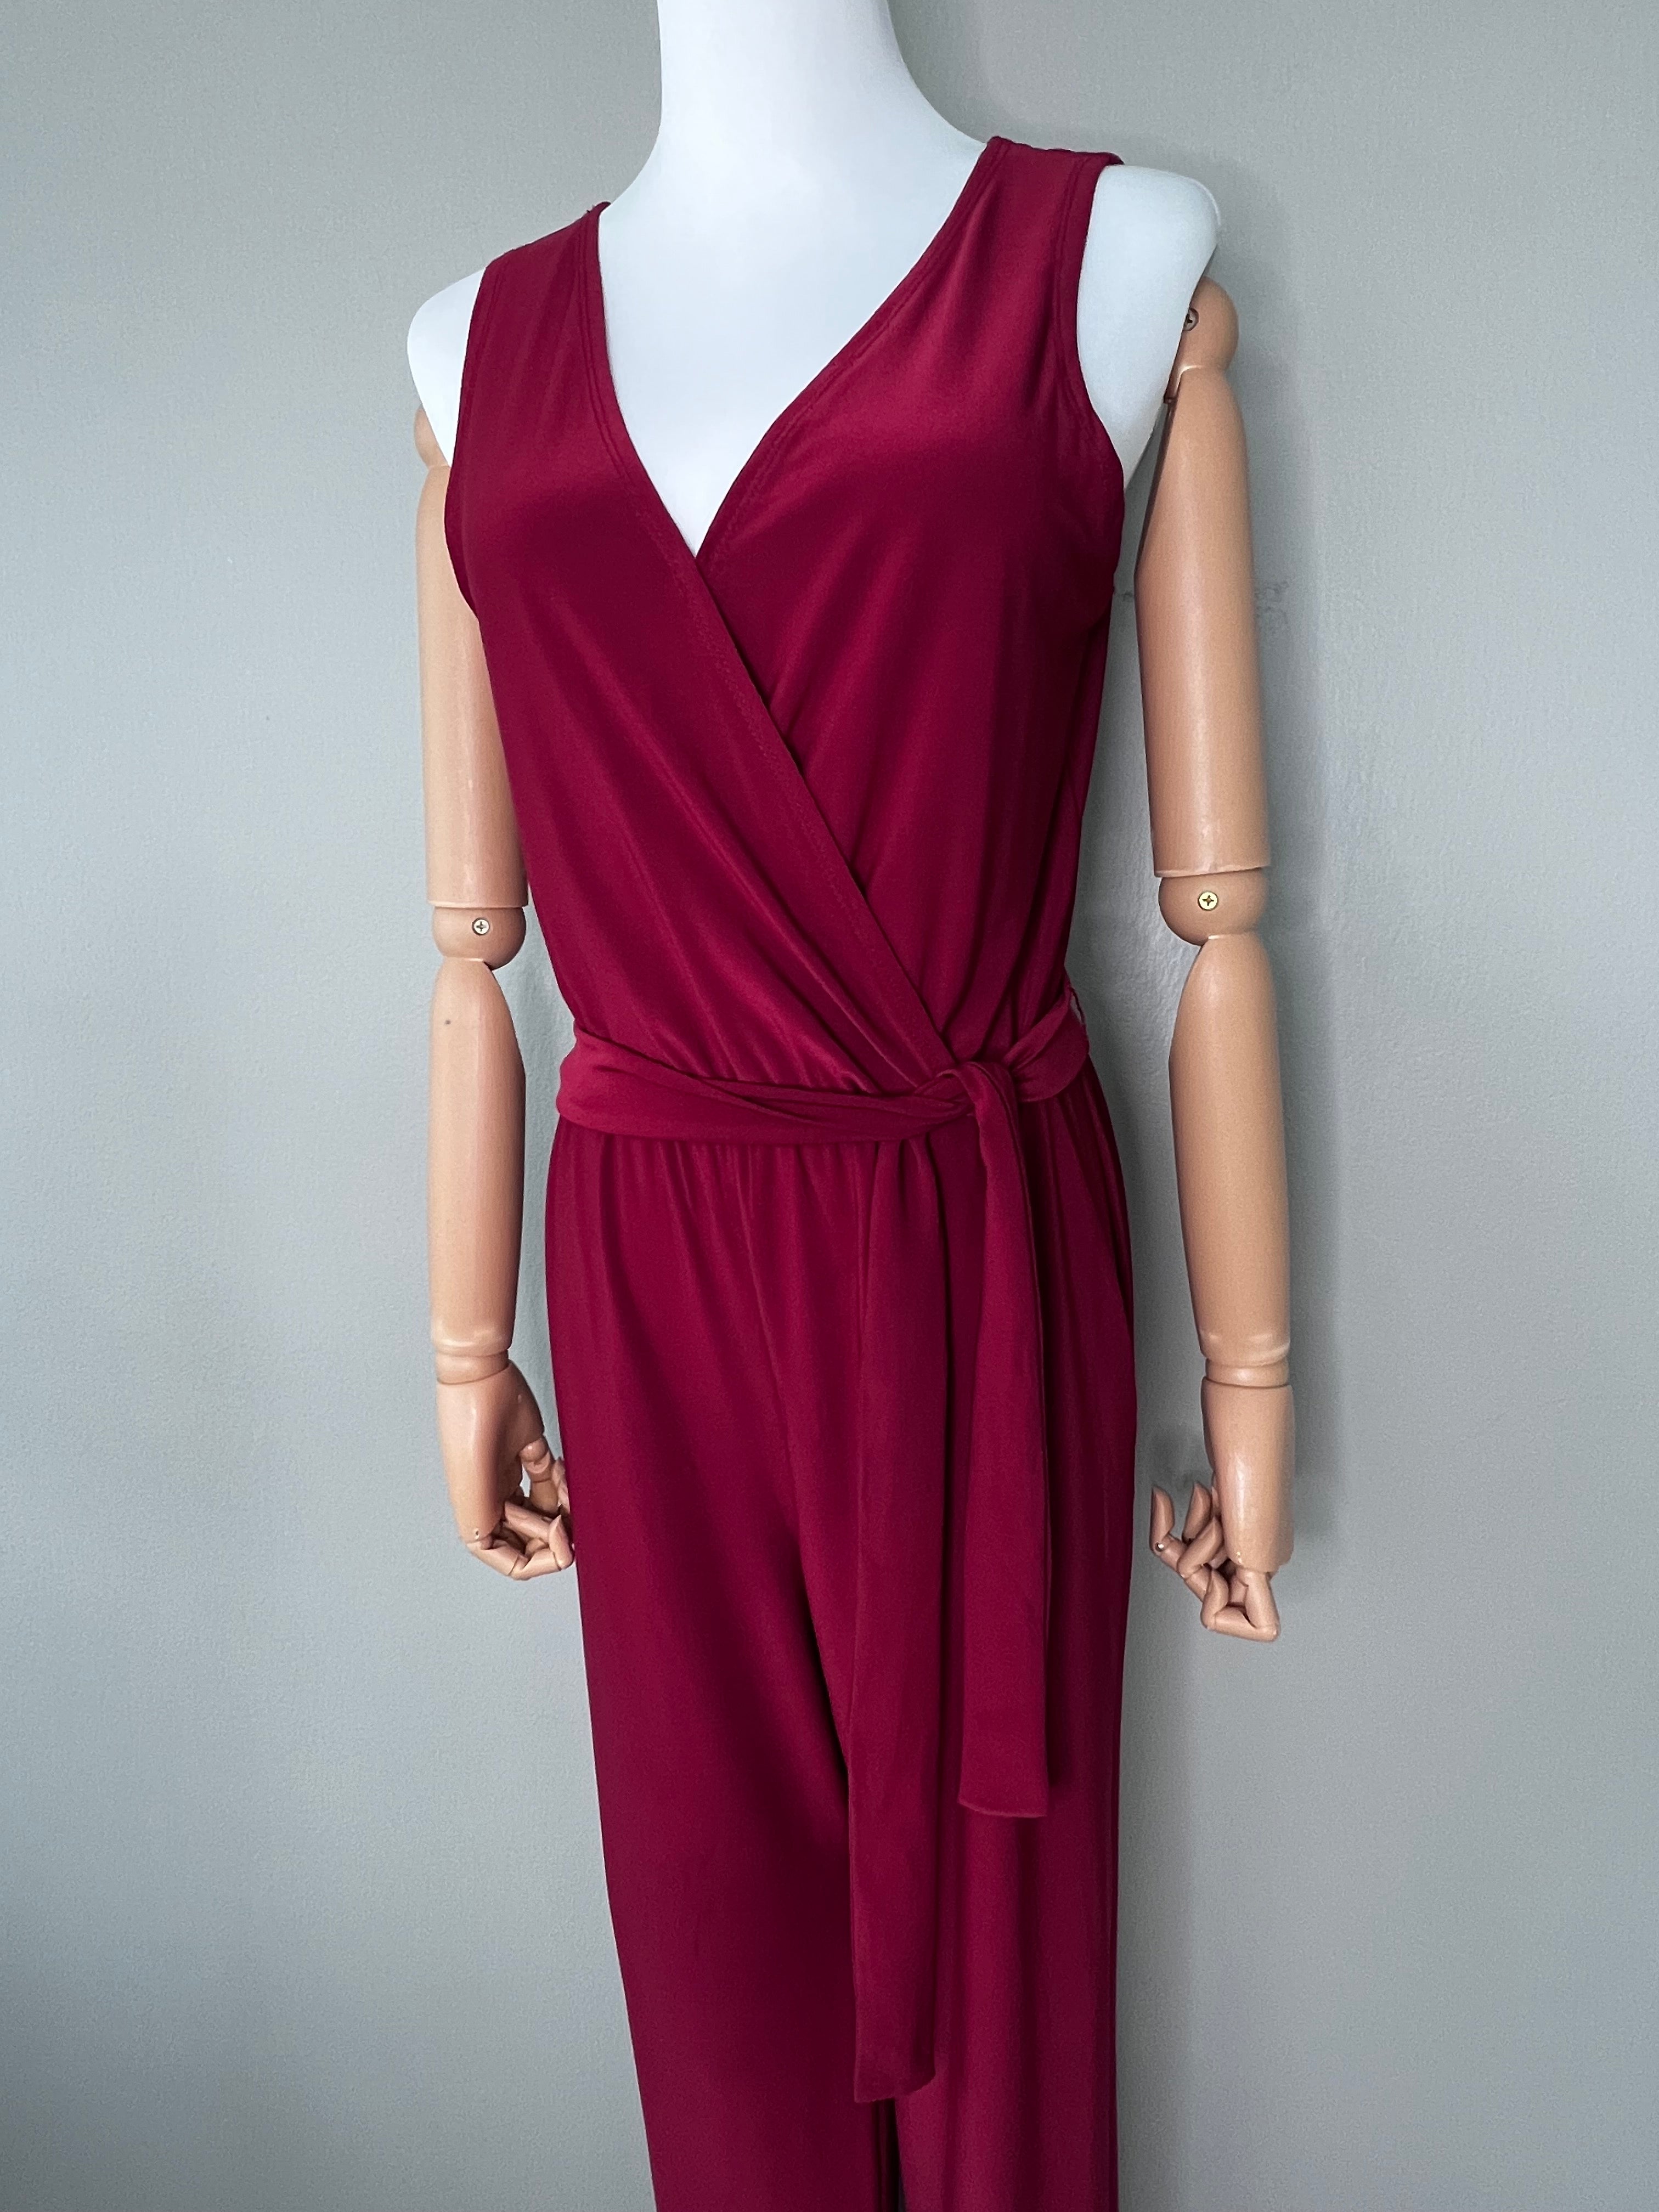 Maroon Sleevless Jumpsuit with Belt and side pocket - NY Collection petite